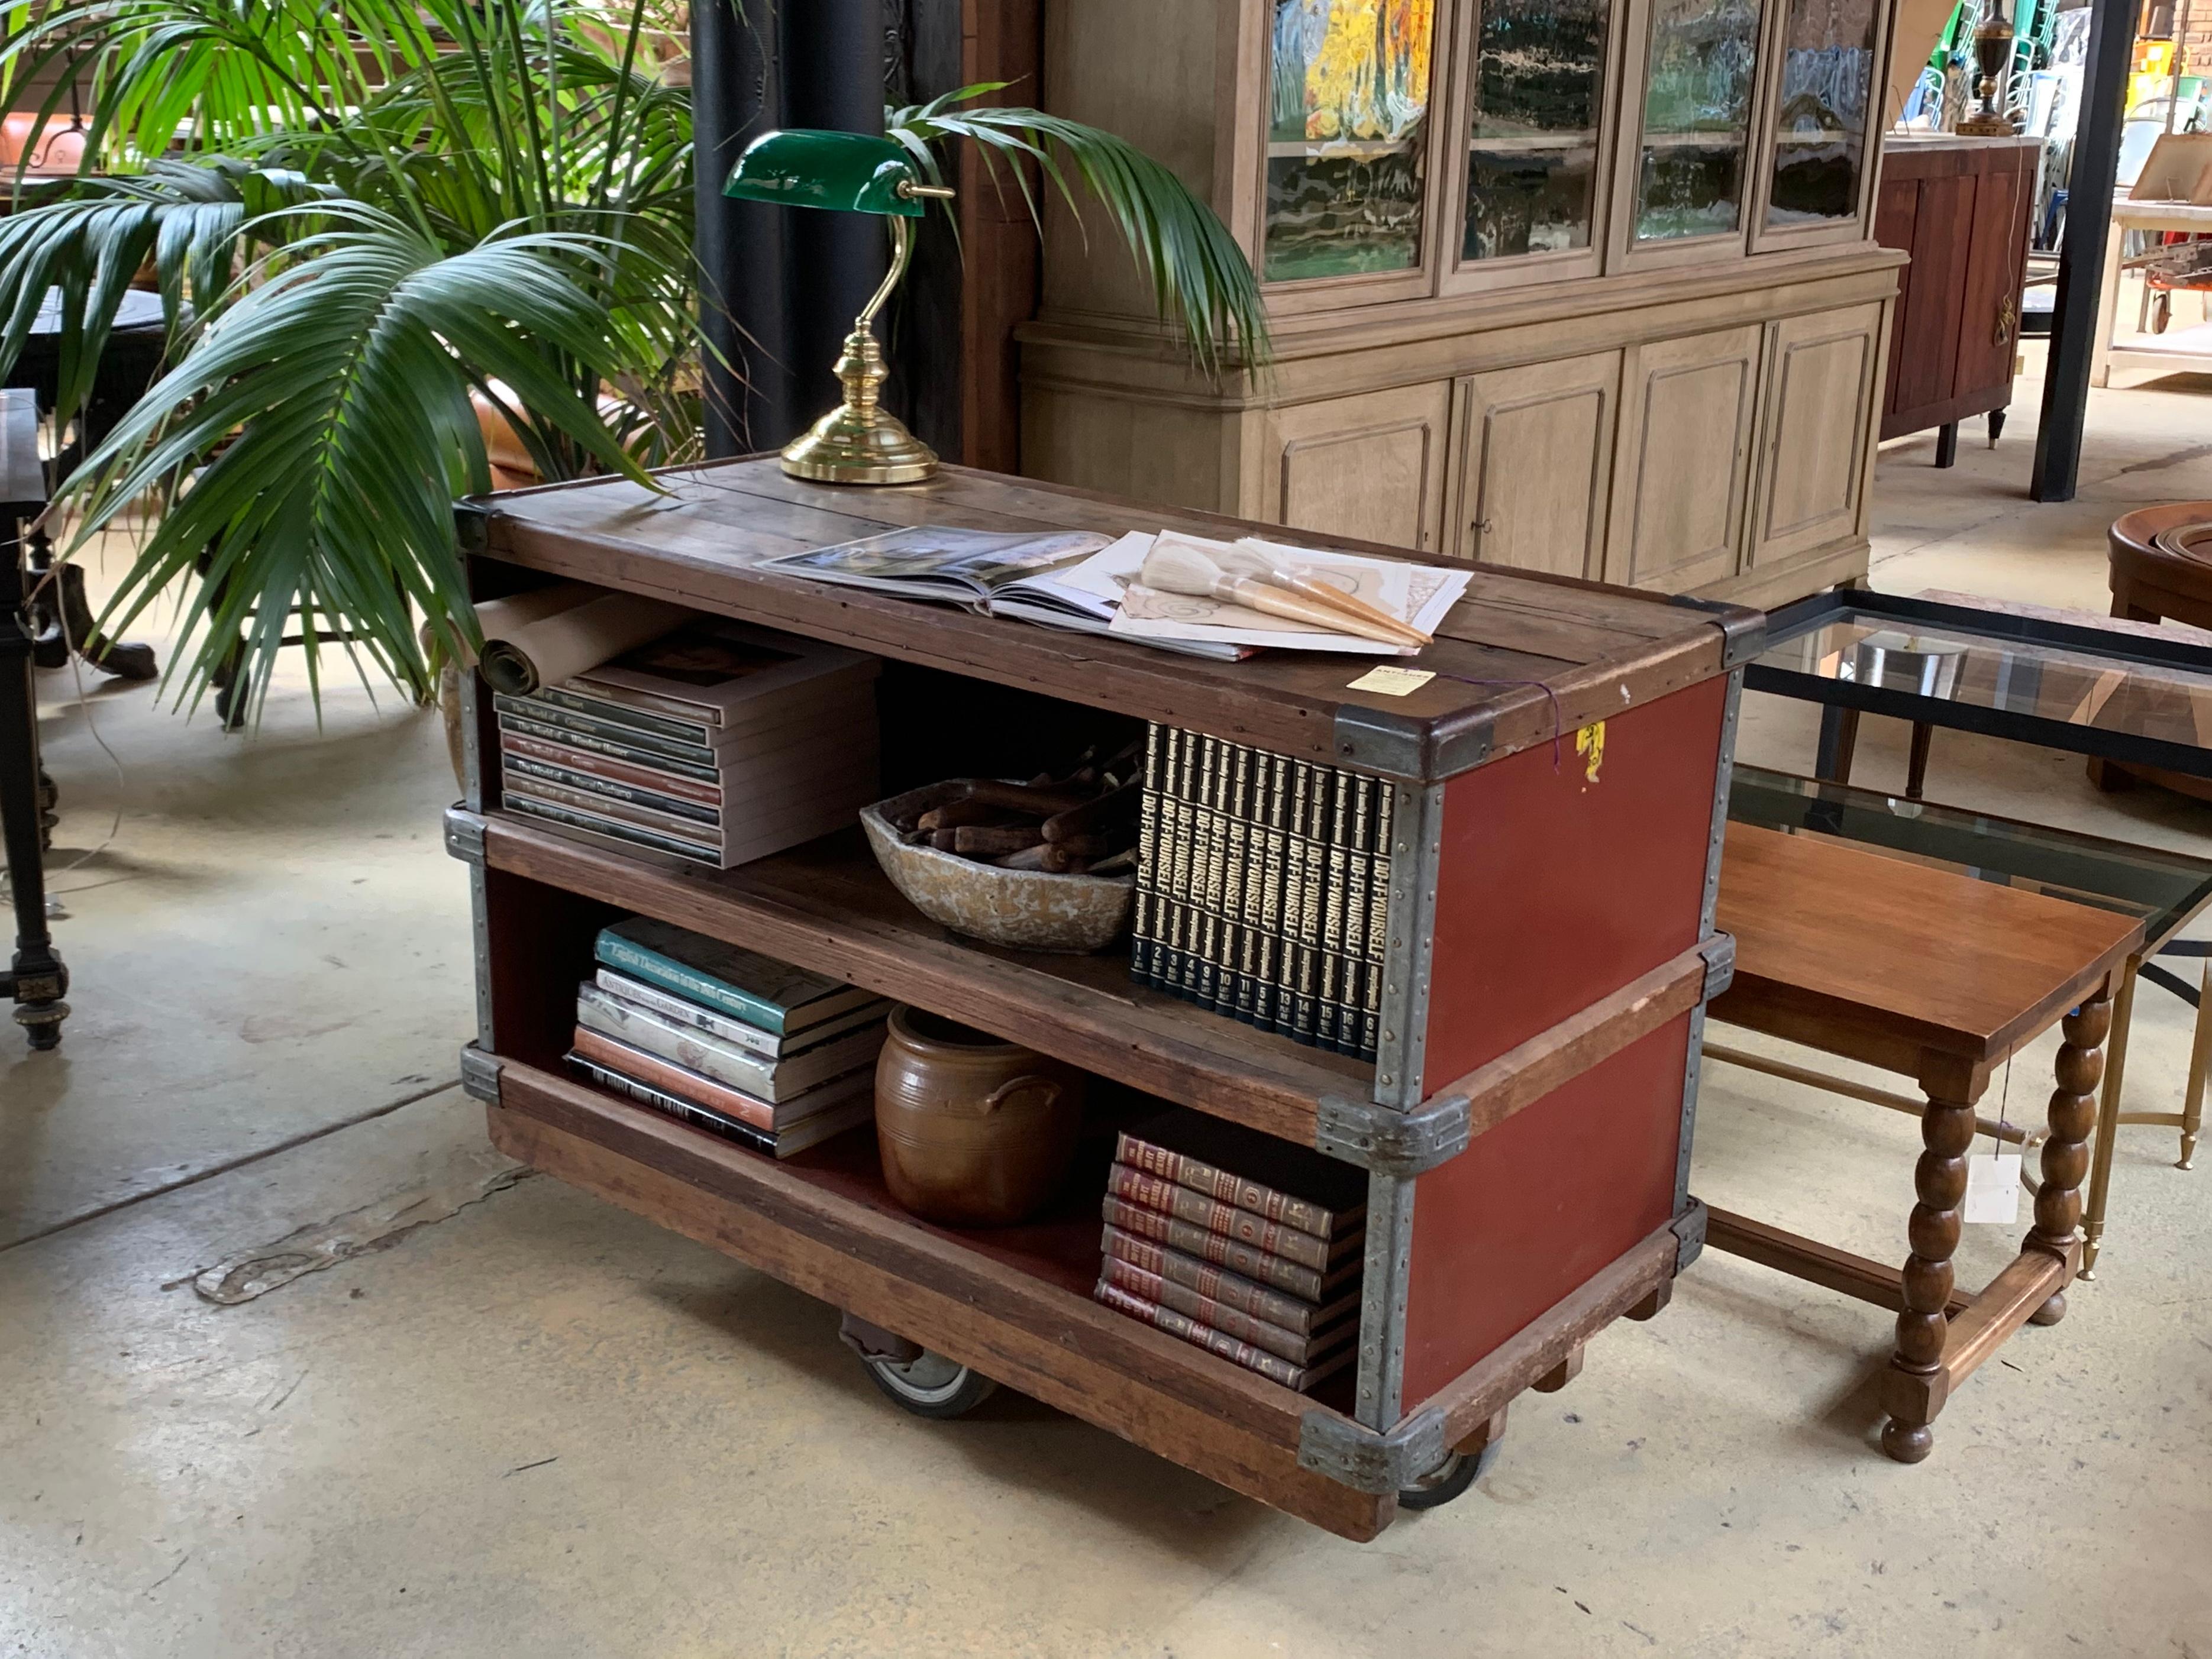 Suroy Industrial Cart on Wheels or Potentially a Sensational Movable Bar Cart 7